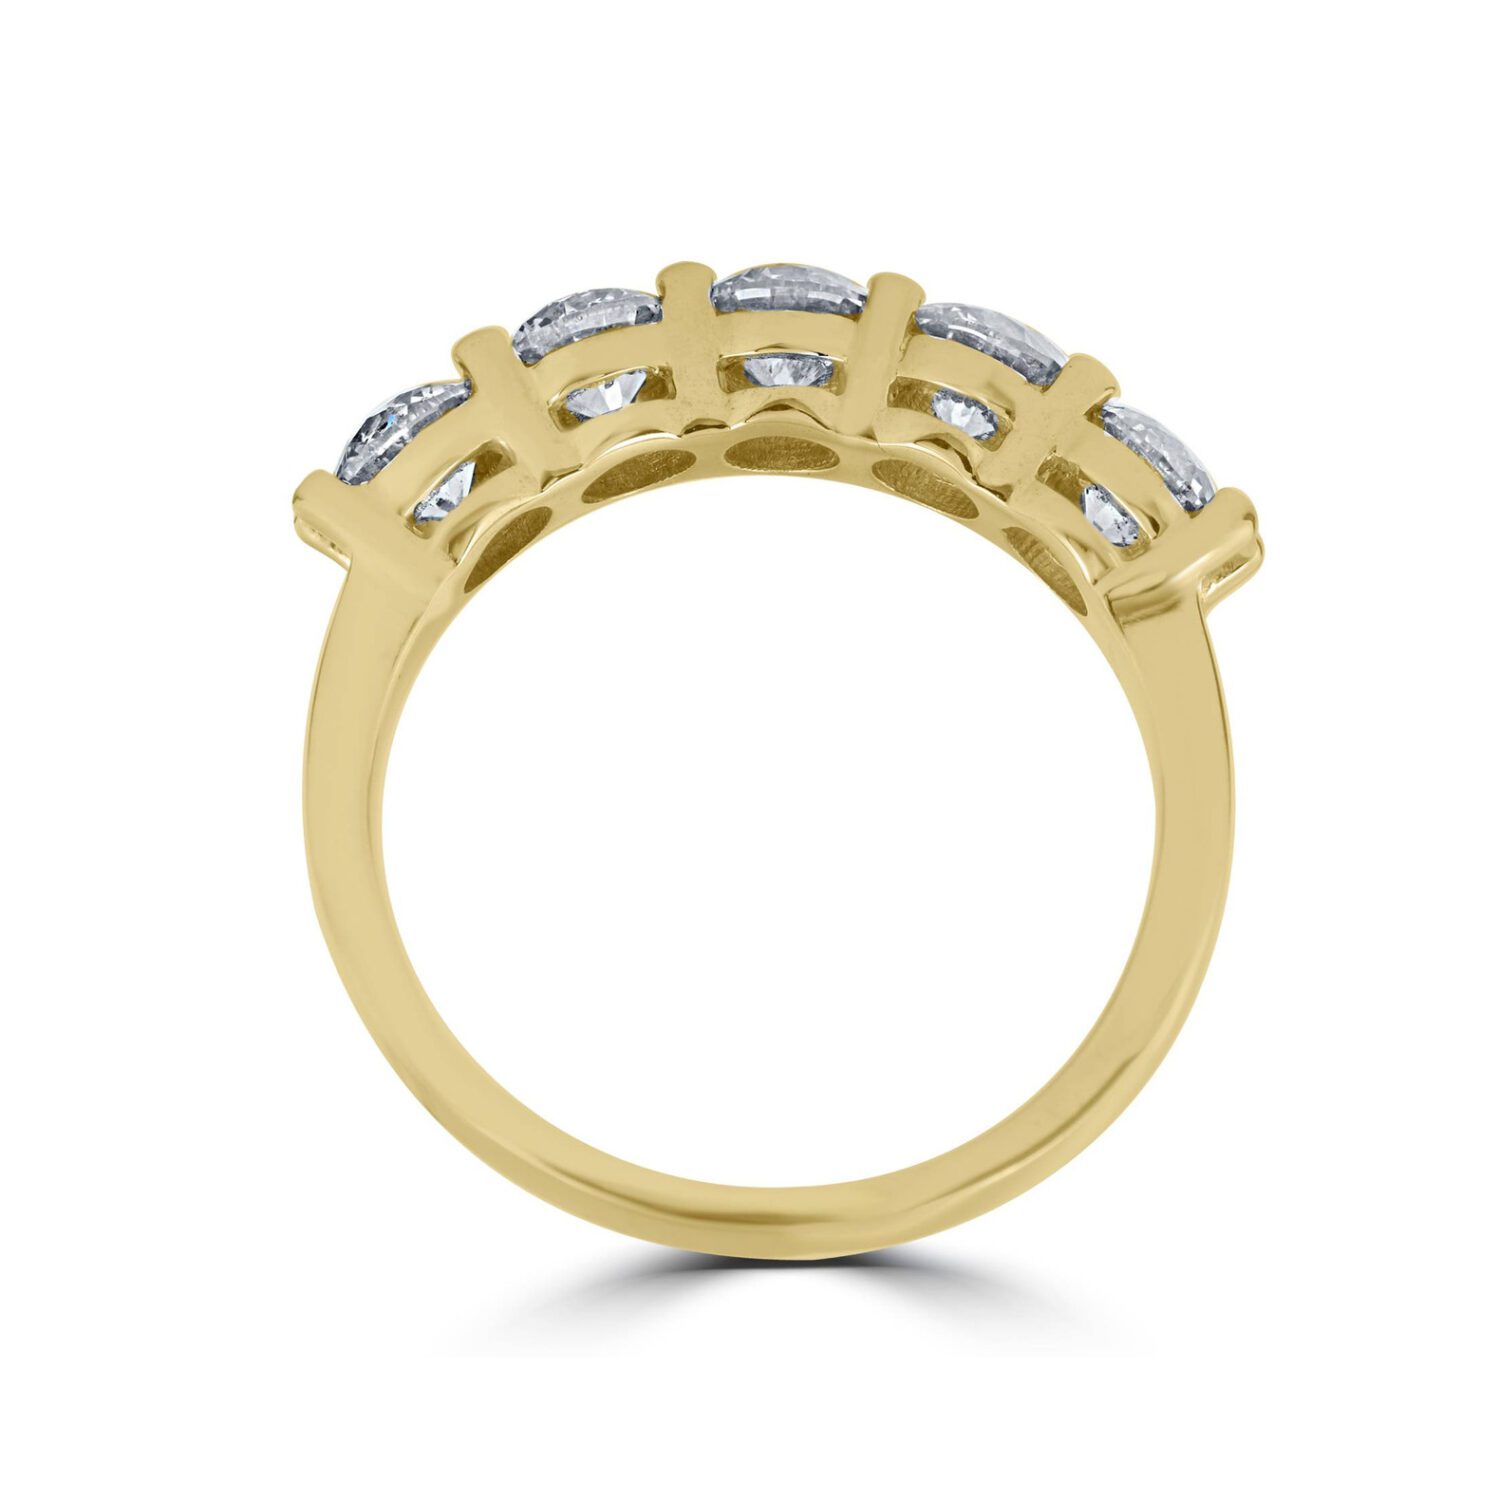 Lab grown diamonds in Cyprus - The 5 Stones 2.5 Carat Half Eternity Band Diamond Ring best quality and price